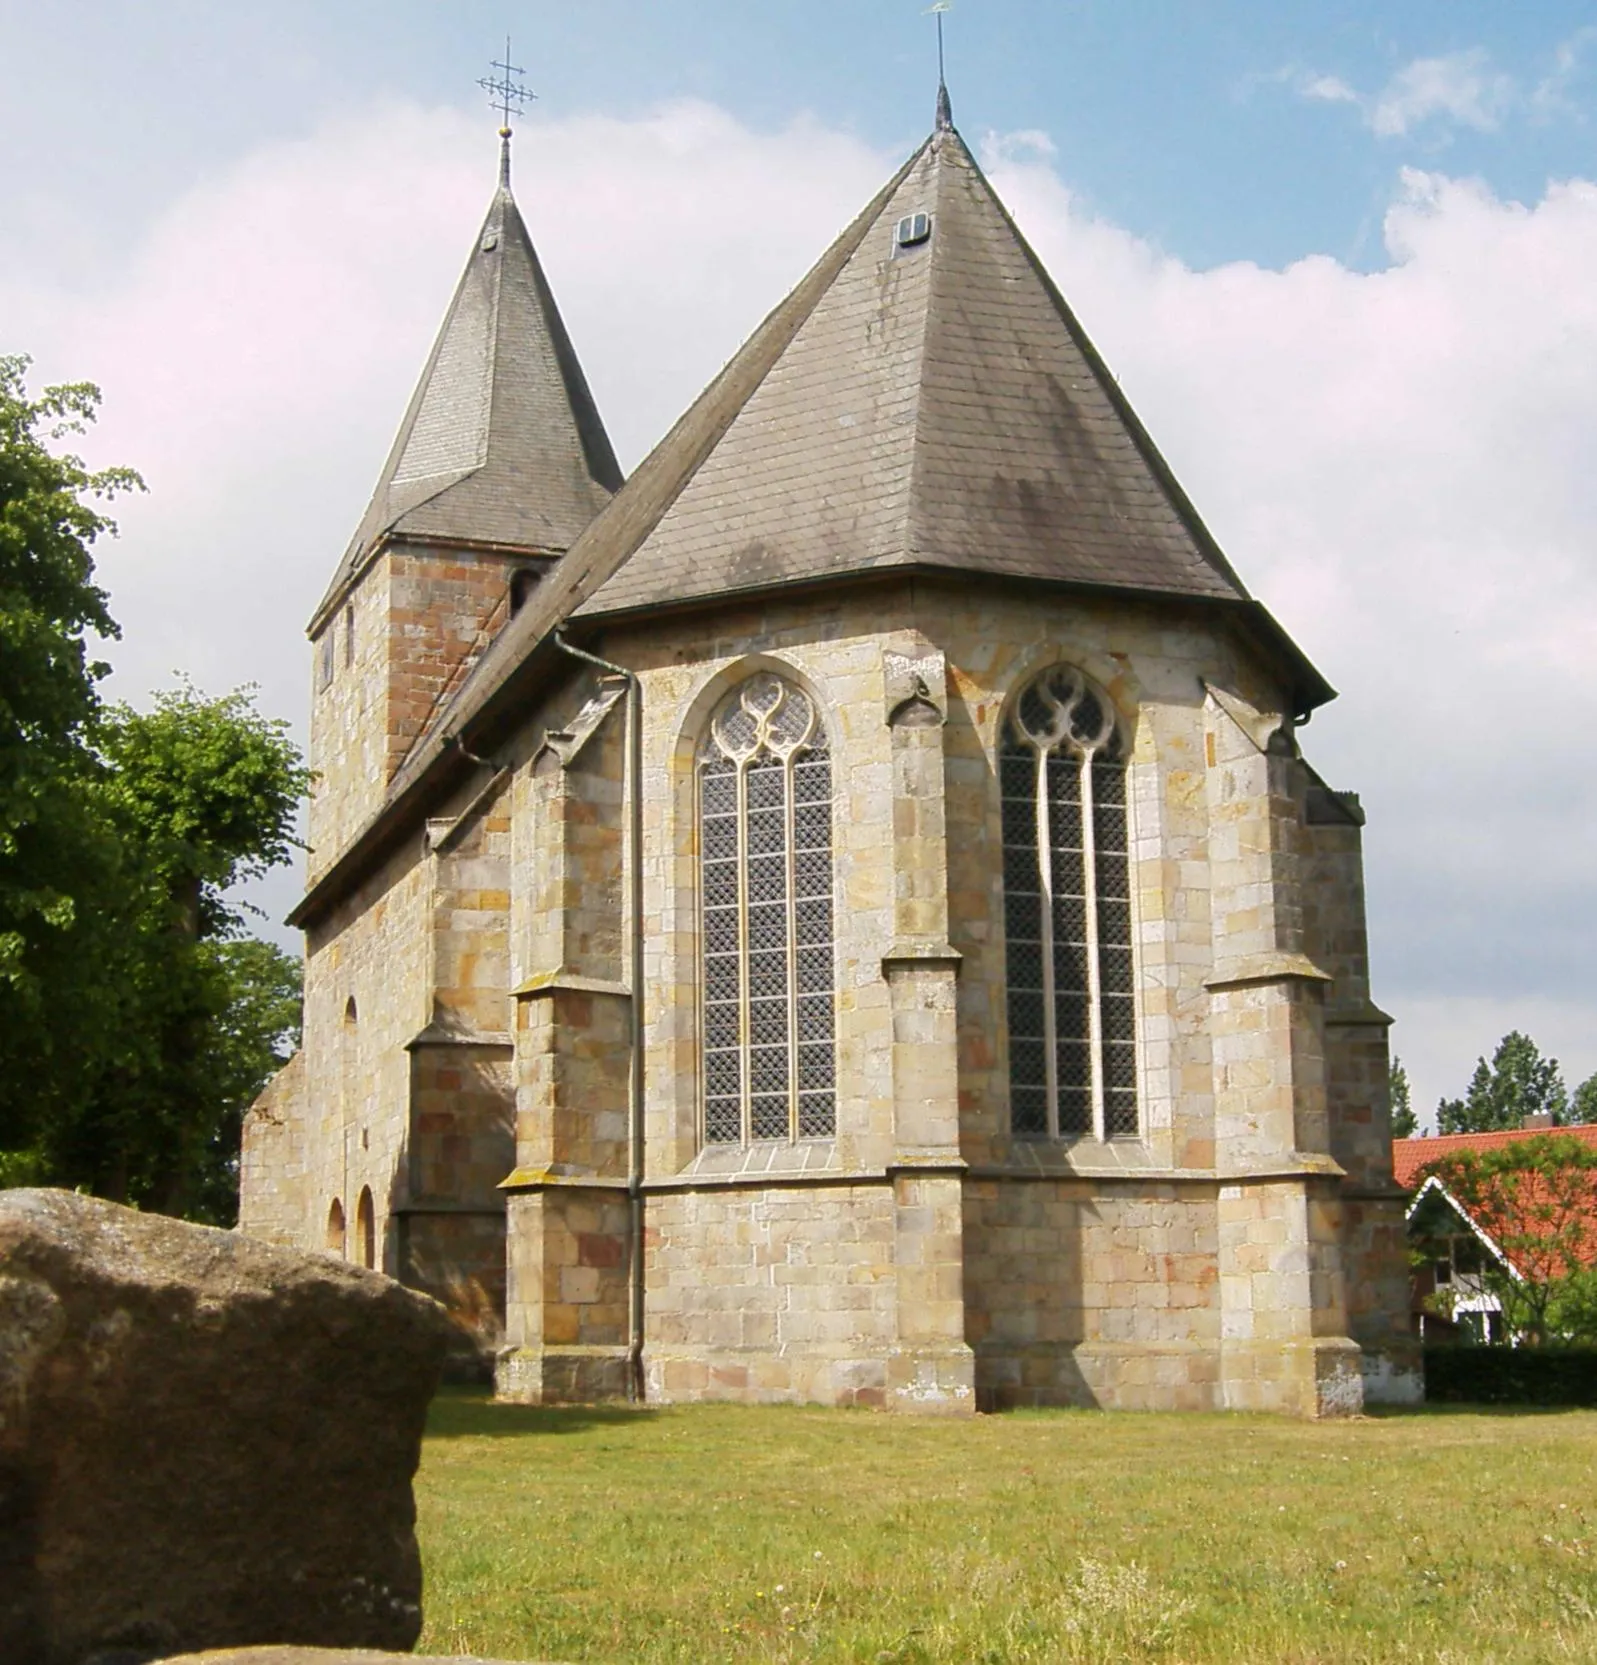 Photo showing: The Evangelical Reformed Church in Ohne, Lower Saxony, Germany, Grafschaft Bentheim's oldest (partly from the 13th century). The church is owned and used by a Reformed congregation within the Evangelical Reformed Church – Synod of Reformed Churches in Bavaria and Northwestern Germany.